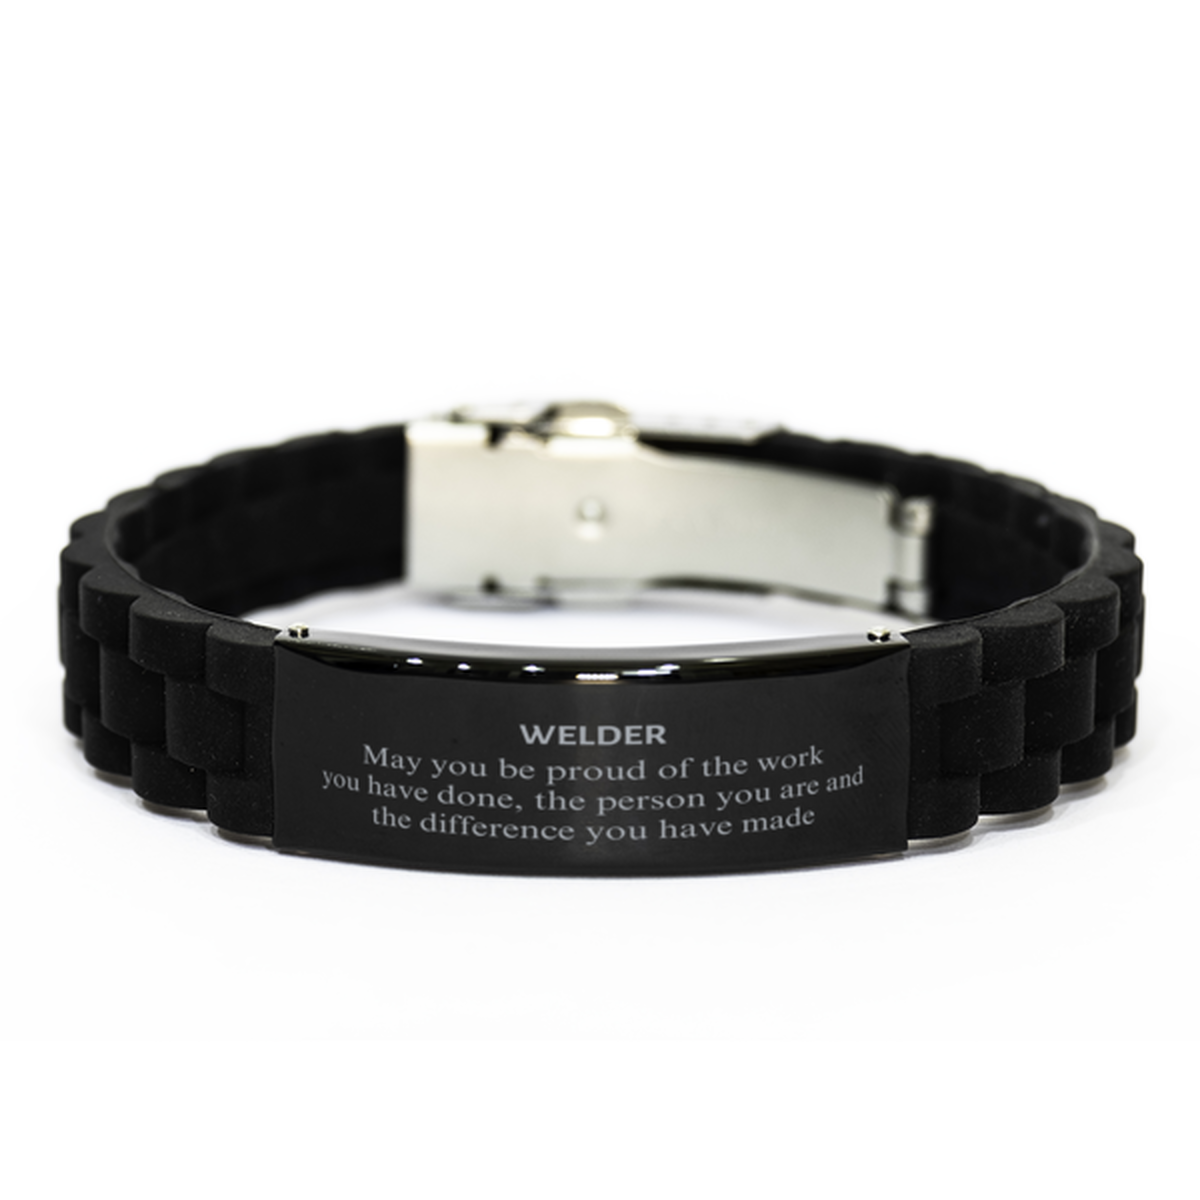 Welder May you be proud of the work you have done, Retirement Welder Black Glidelock Clasp Bracelet for Colleague Appreciation Gifts Amazing for Welder